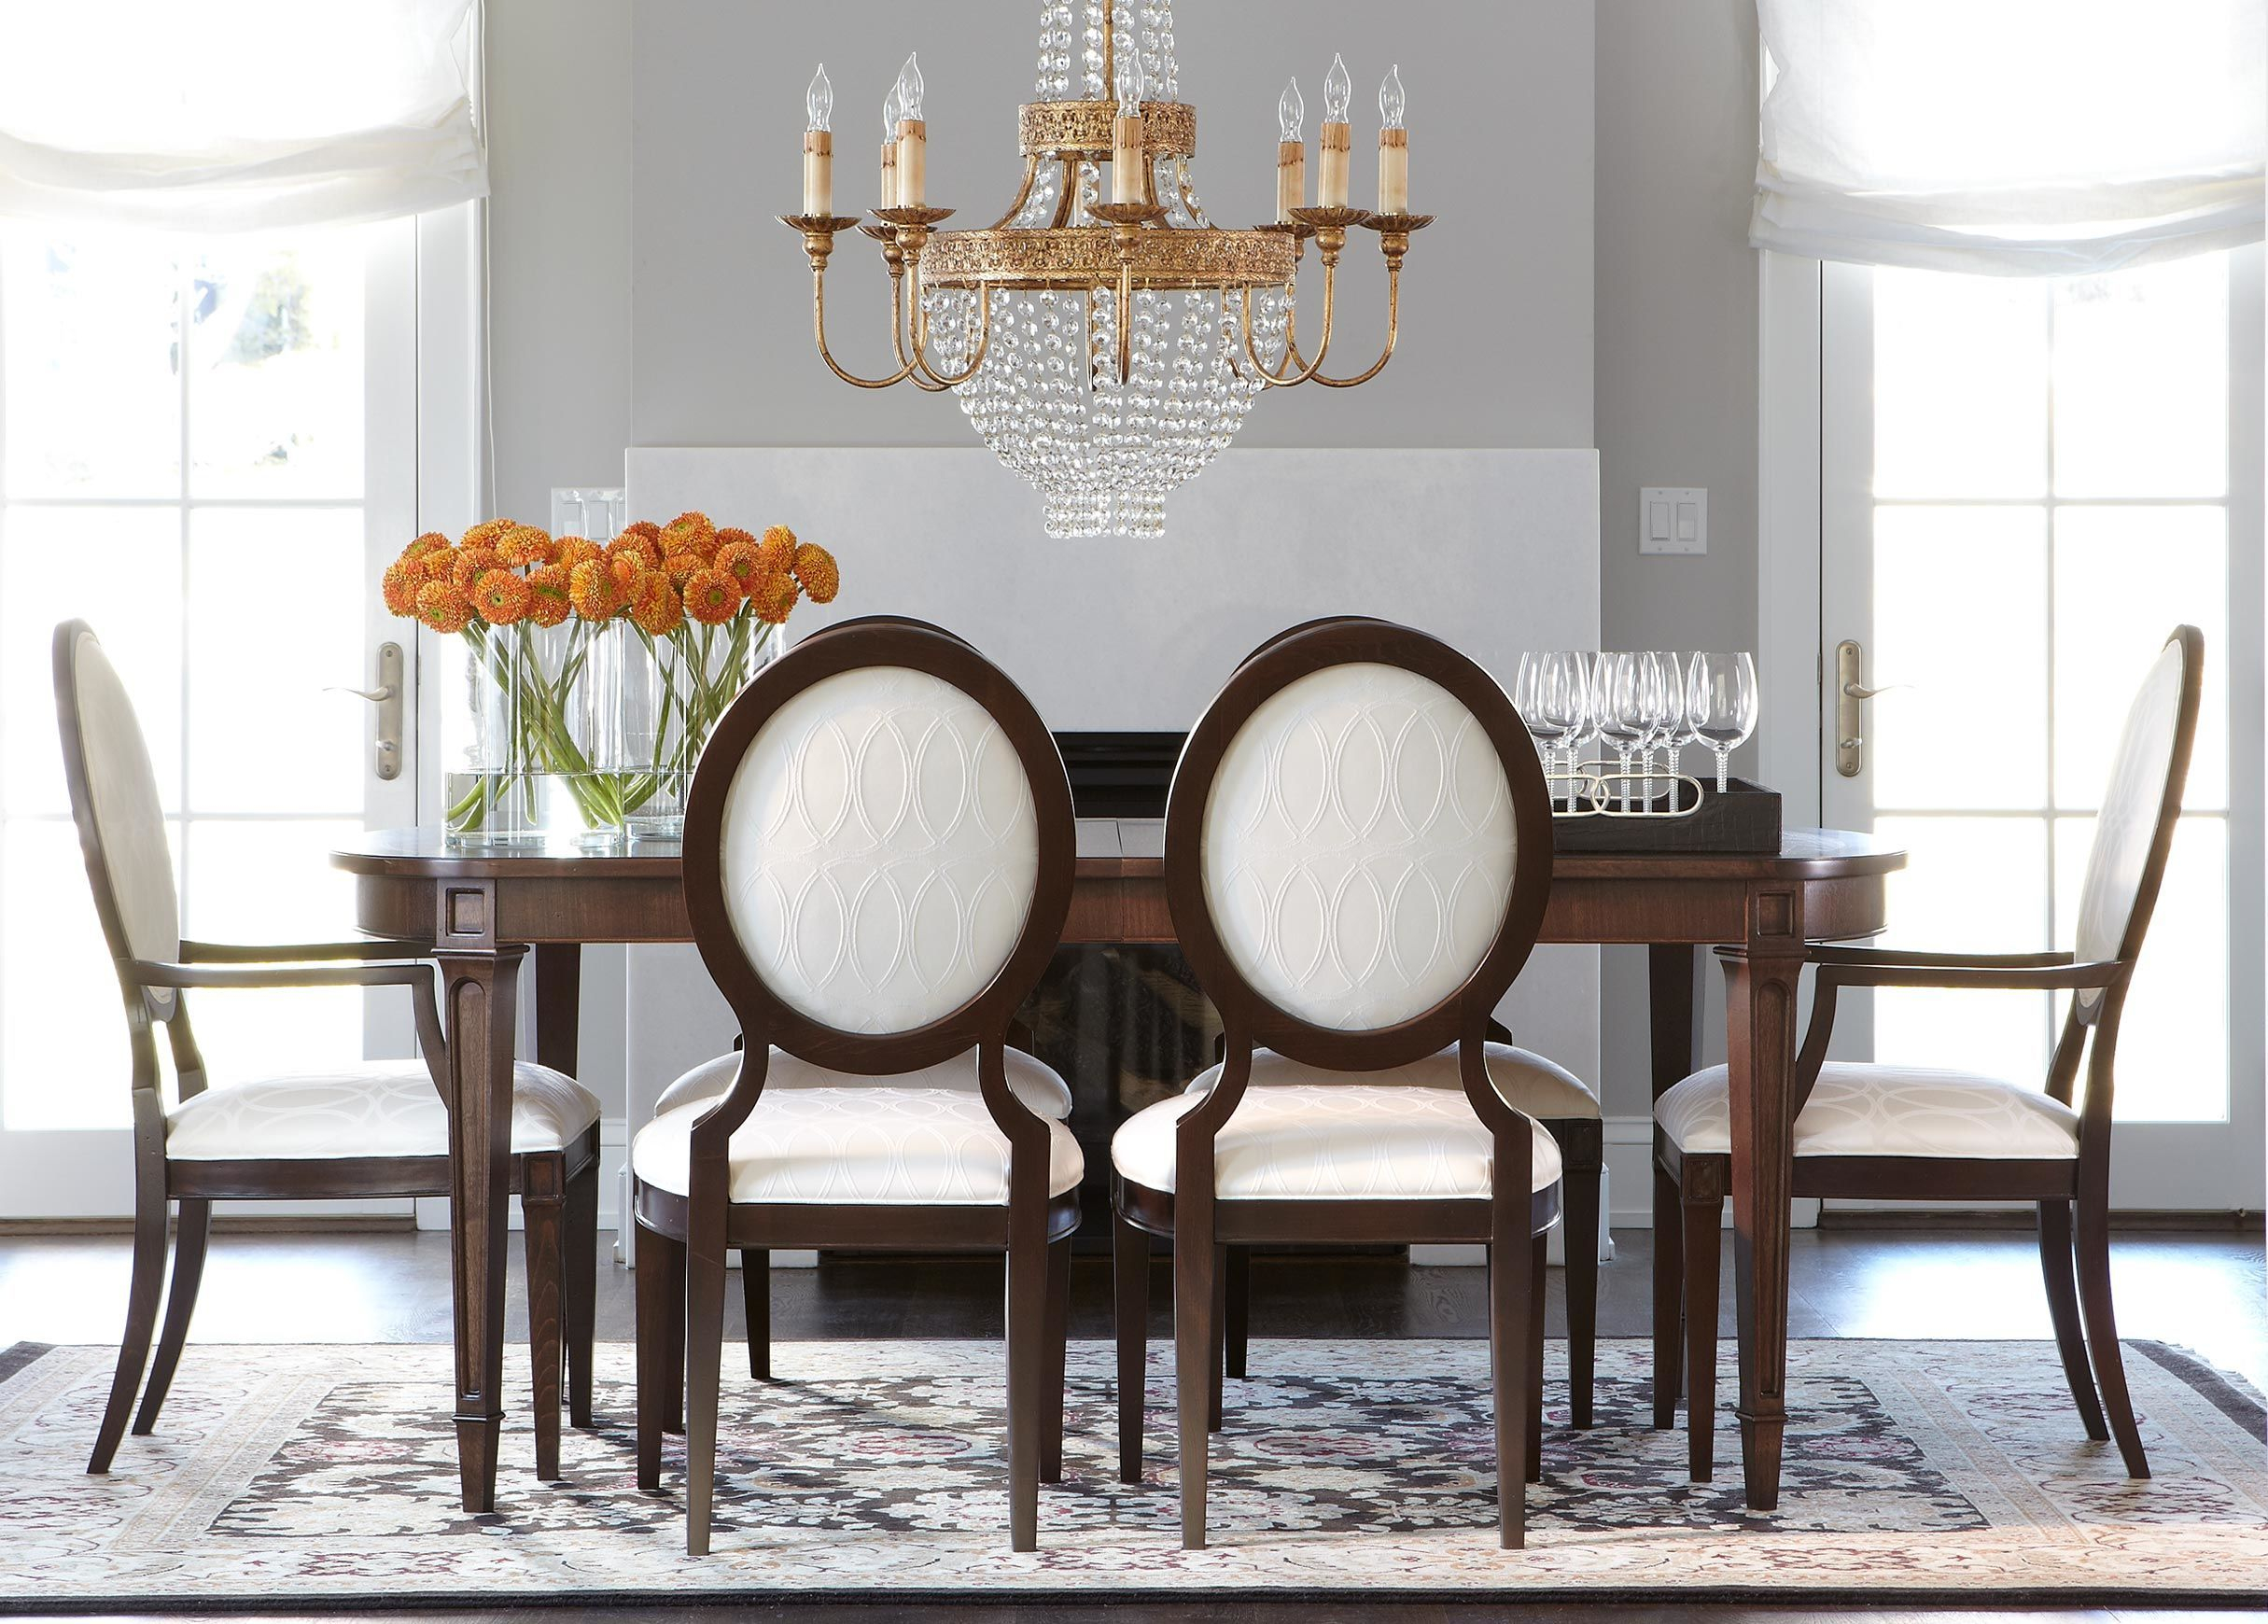 Lynnwood Dining Table Ethan Allen Definitely Want This But intended for sizing 2430 X 1740